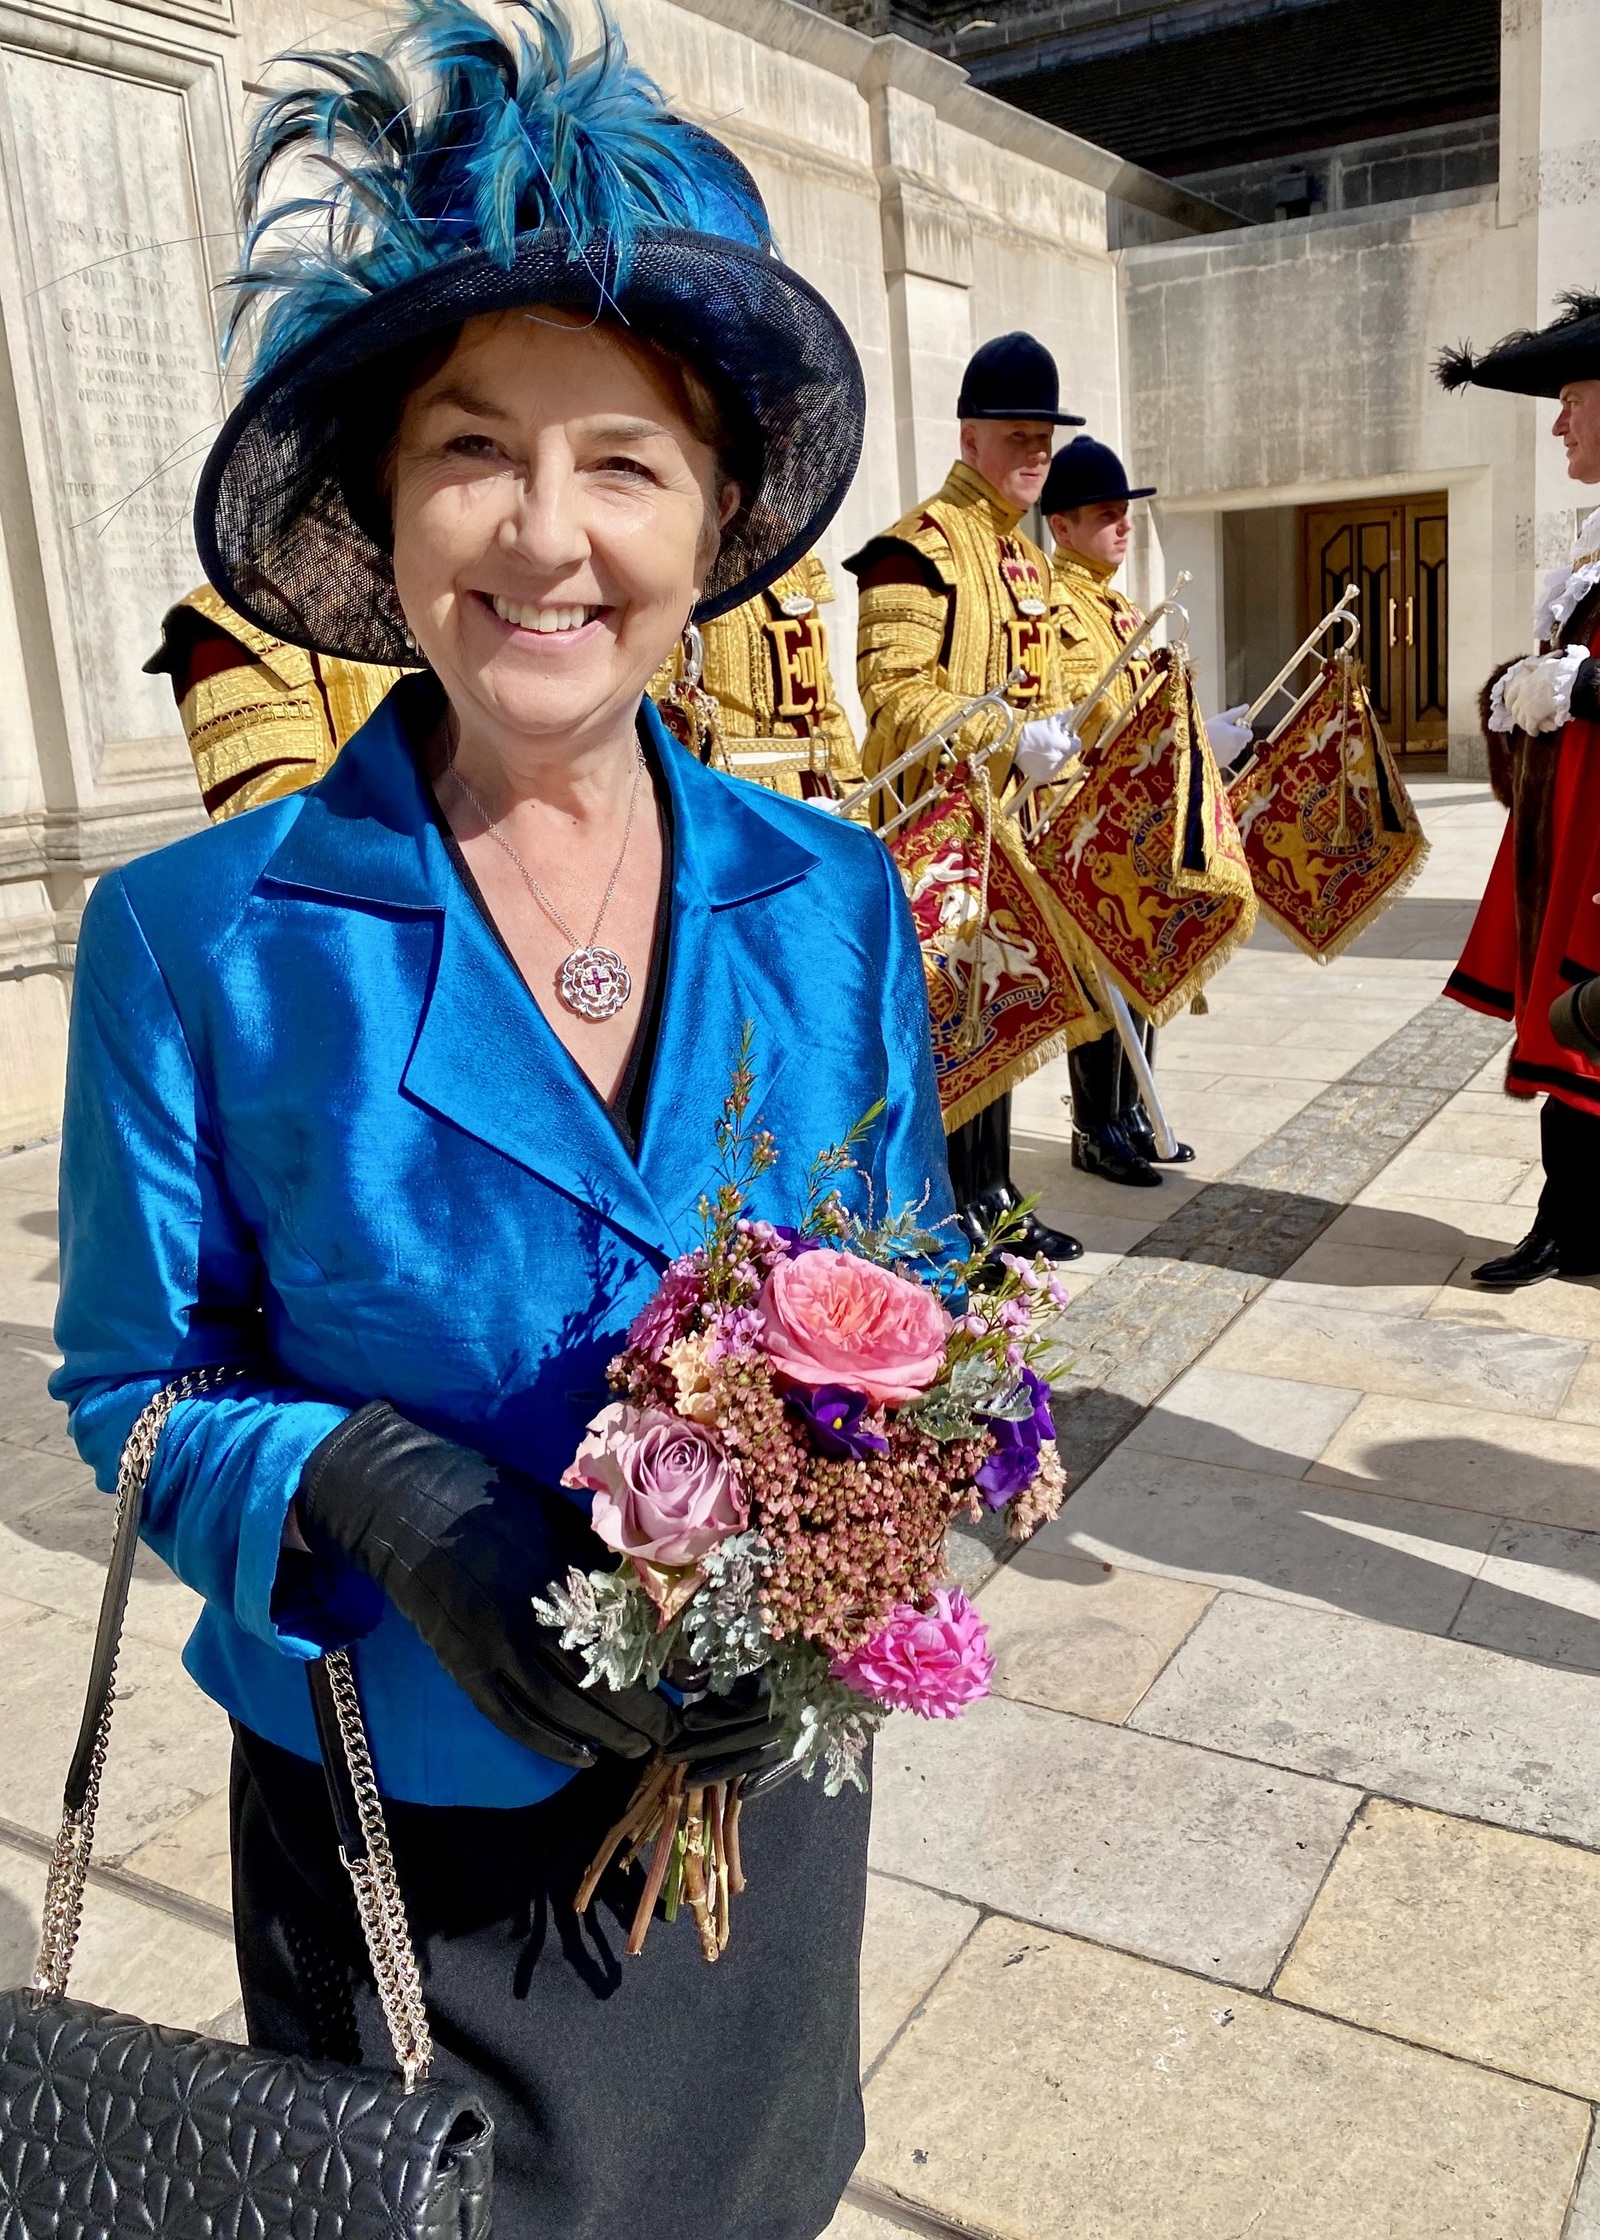 29 Sept 22 - The State trumpeters, Lord Mayor…and Marian!